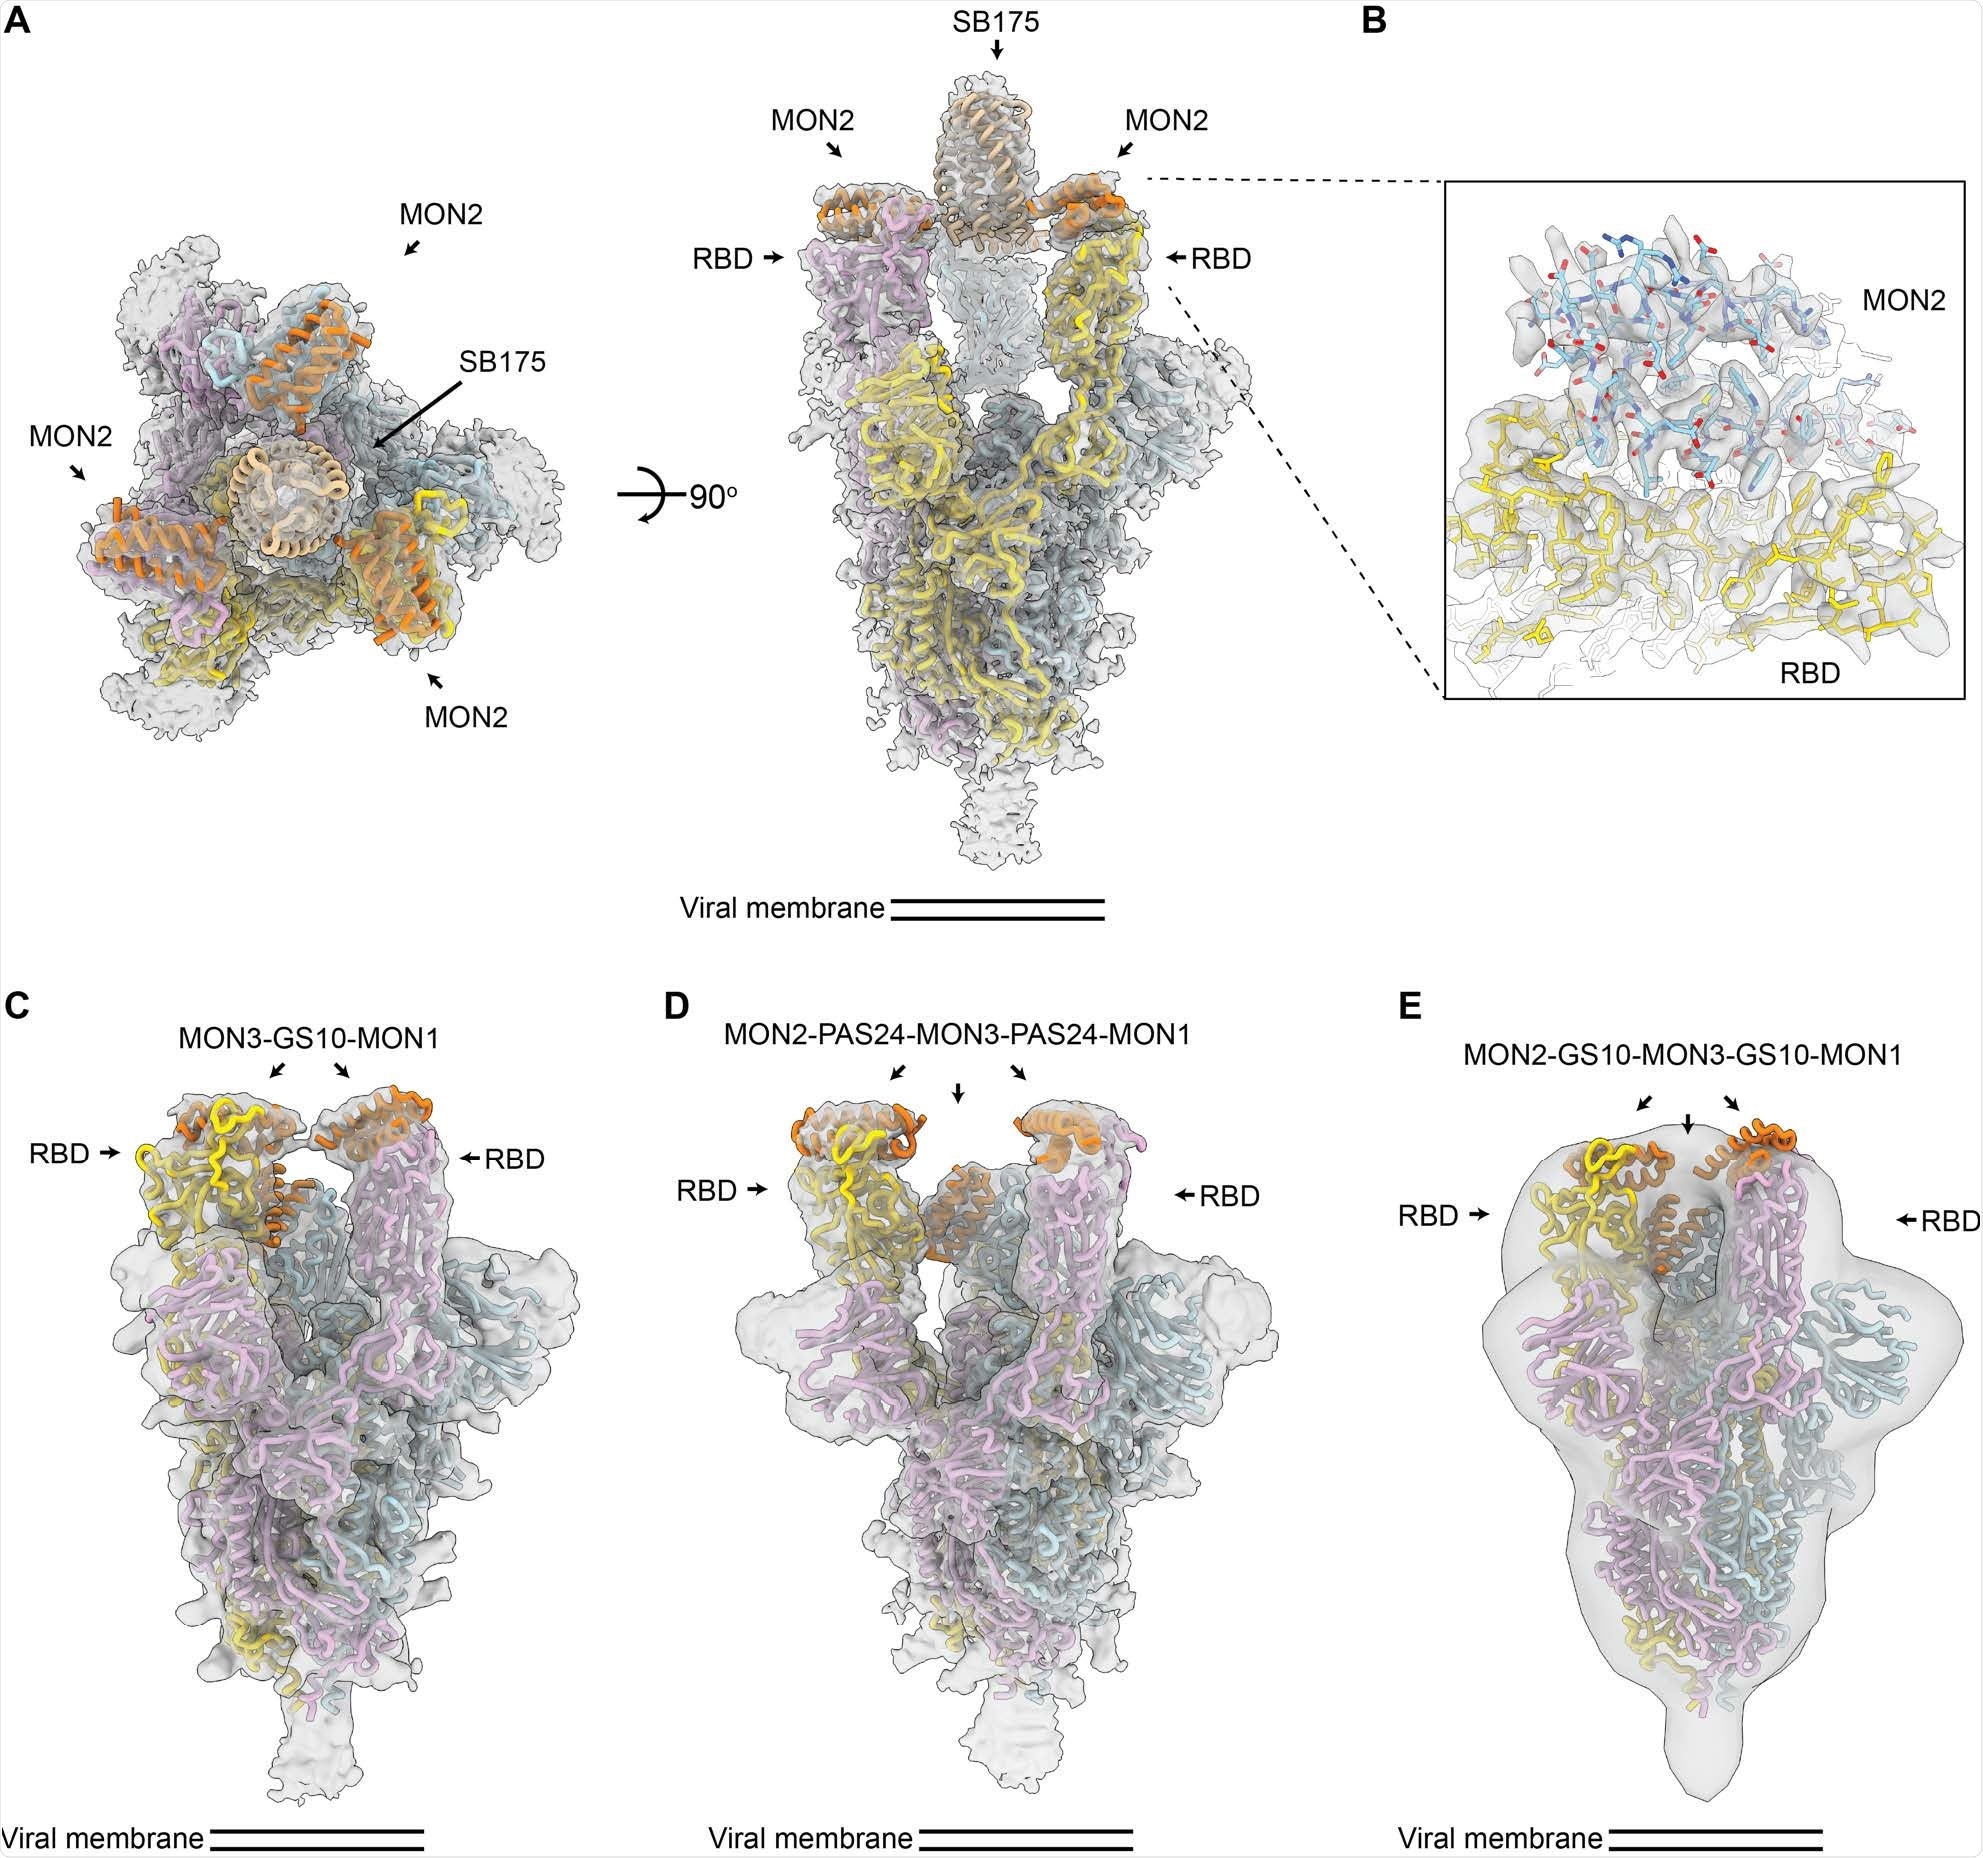 CryoEM structures of multivalent minibinders in complex with the SARS-CoV-2 S6P glycoprotein. (A) CryoEM map of TRI2-2 in complex with the S6P in two orthogonal orientations. (B) Zoomed-in view of the TRI2-2 and S6P complex interface obtained using local refinement of the RBD and TRI2-2. The RBD and MON2 built at 2.9 Å resolution are shown in yellow and blue, respectively. (C) CryoEM map of FUS31-G10 in complex with two RBDs. (D) CryoEM map of FUS231-P24 in complex with three RBDs. (E) Negative-stain EM map of FUS231-G10 in complex with S6P. The S trimer and minibinder models are placed in the whole map by rigid body fitting. EM density is shown as a transparent gray surface with a fitted atomic model. Spike protomers (PDB 7JZL) are shown in yellow, blue, and pink. Minibinders (PDB 7JZU, 7JZM, and MON2 atomic structure in this study) are shown in orange.